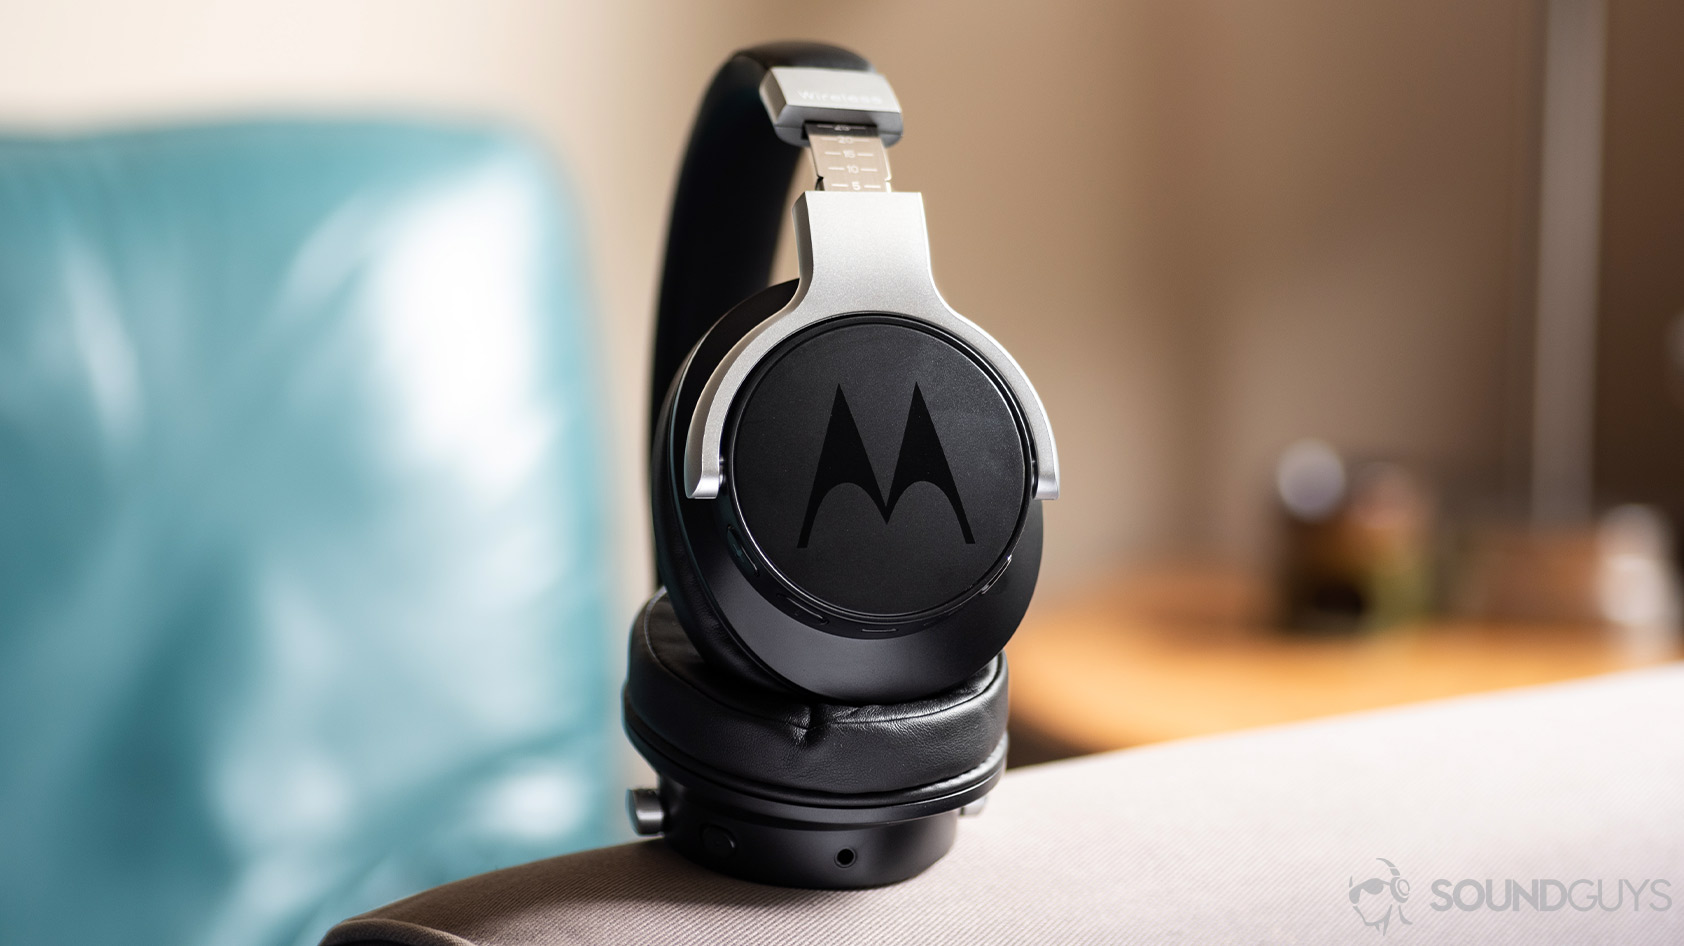 A photo of the Motorola Escape 500 ANC noise canceling headphones propped up on a grey cloth surface.